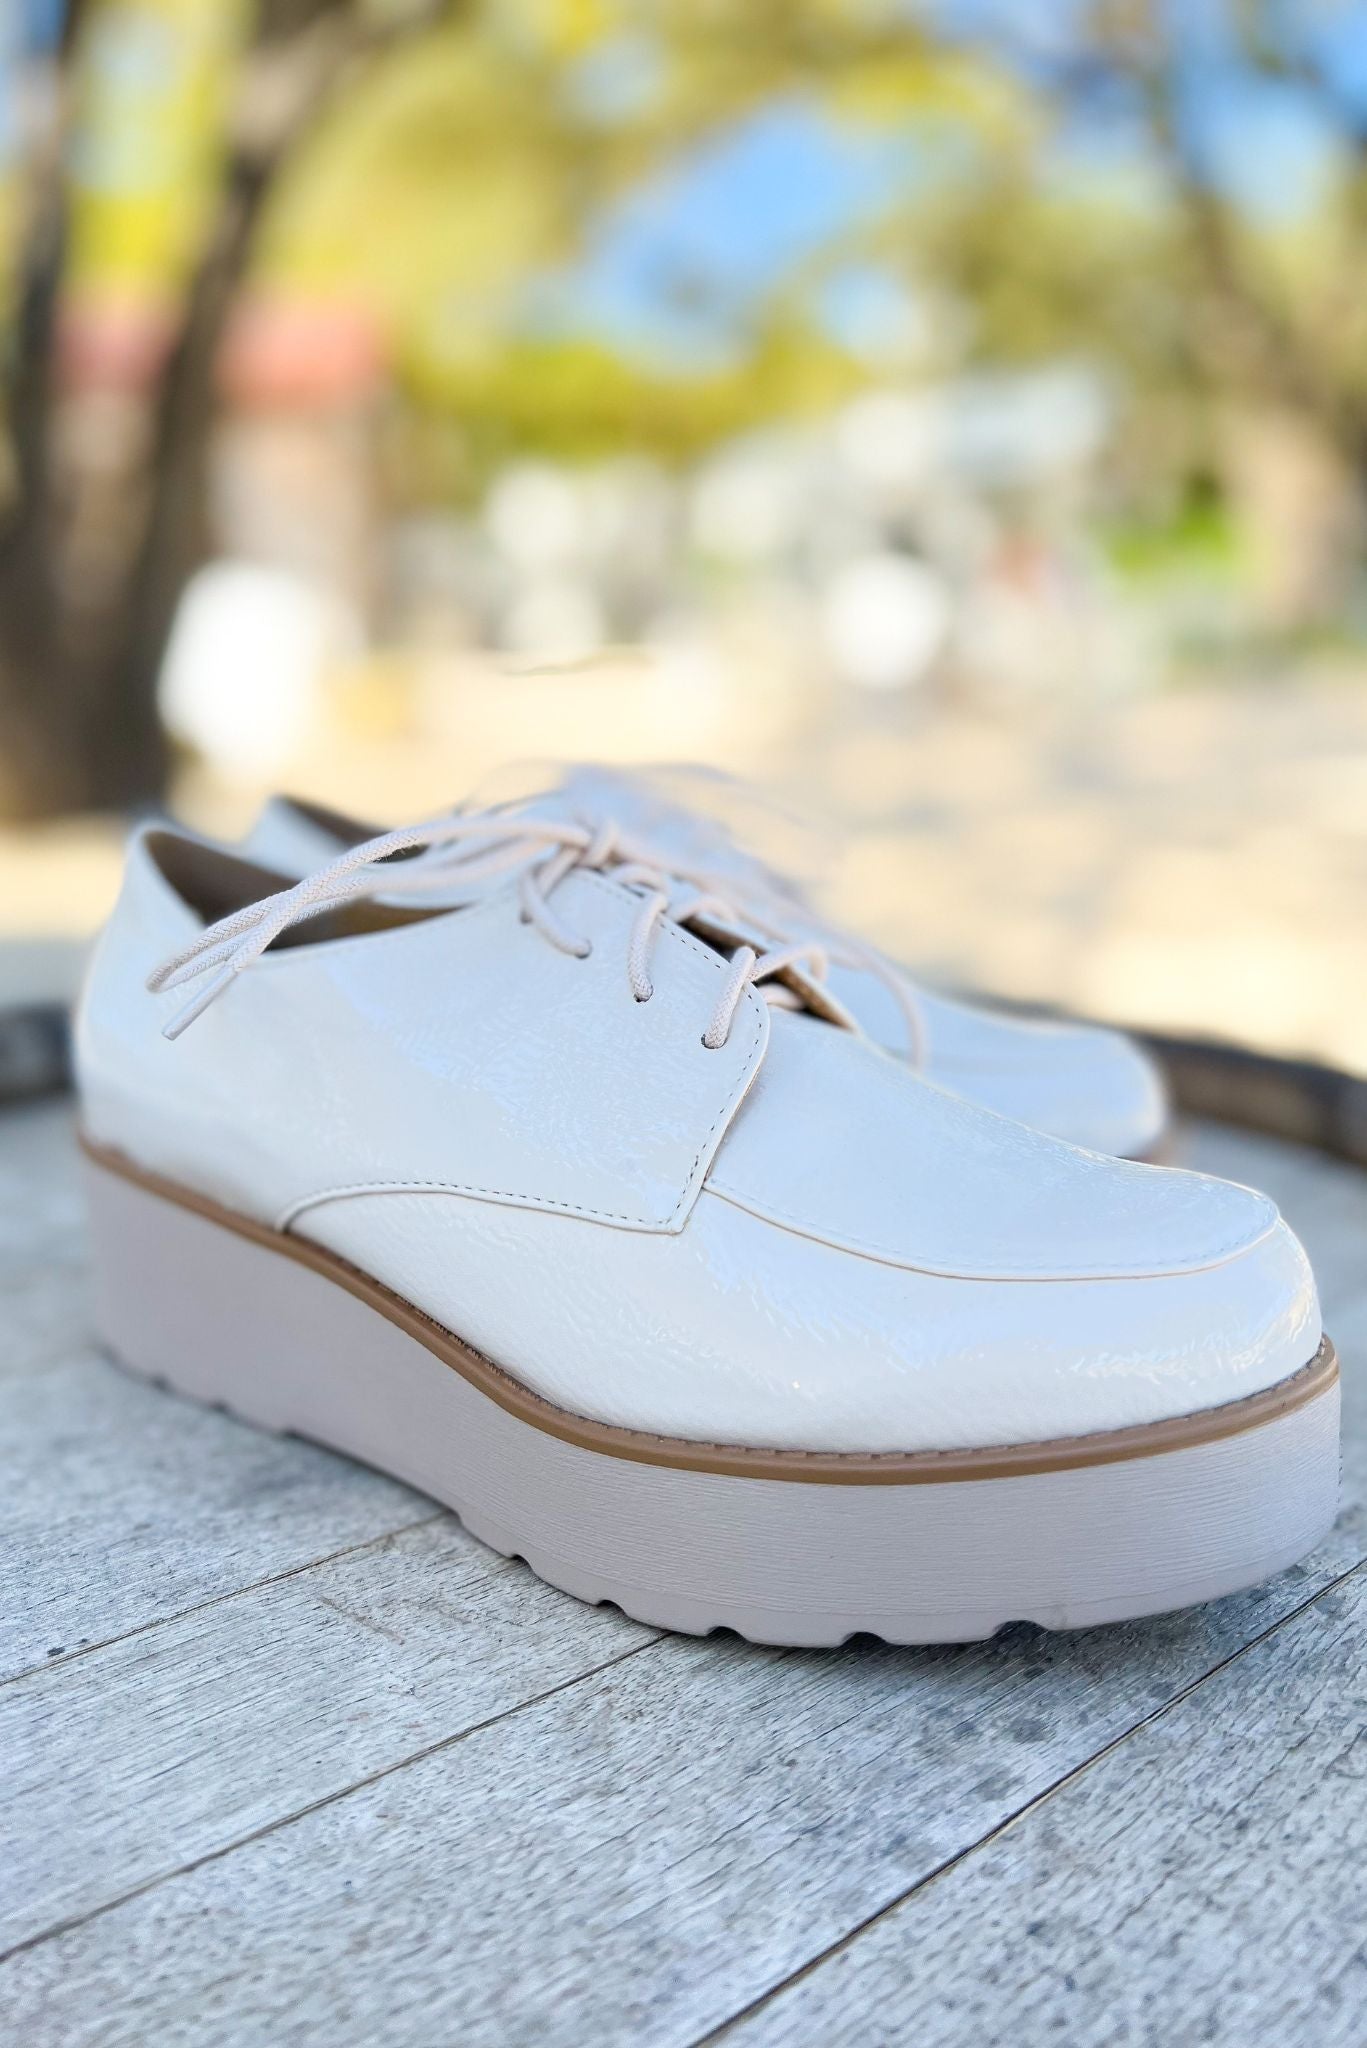 Load image into Gallery viewer, Beige Patent Platform Loafers *FINAL SALE*
